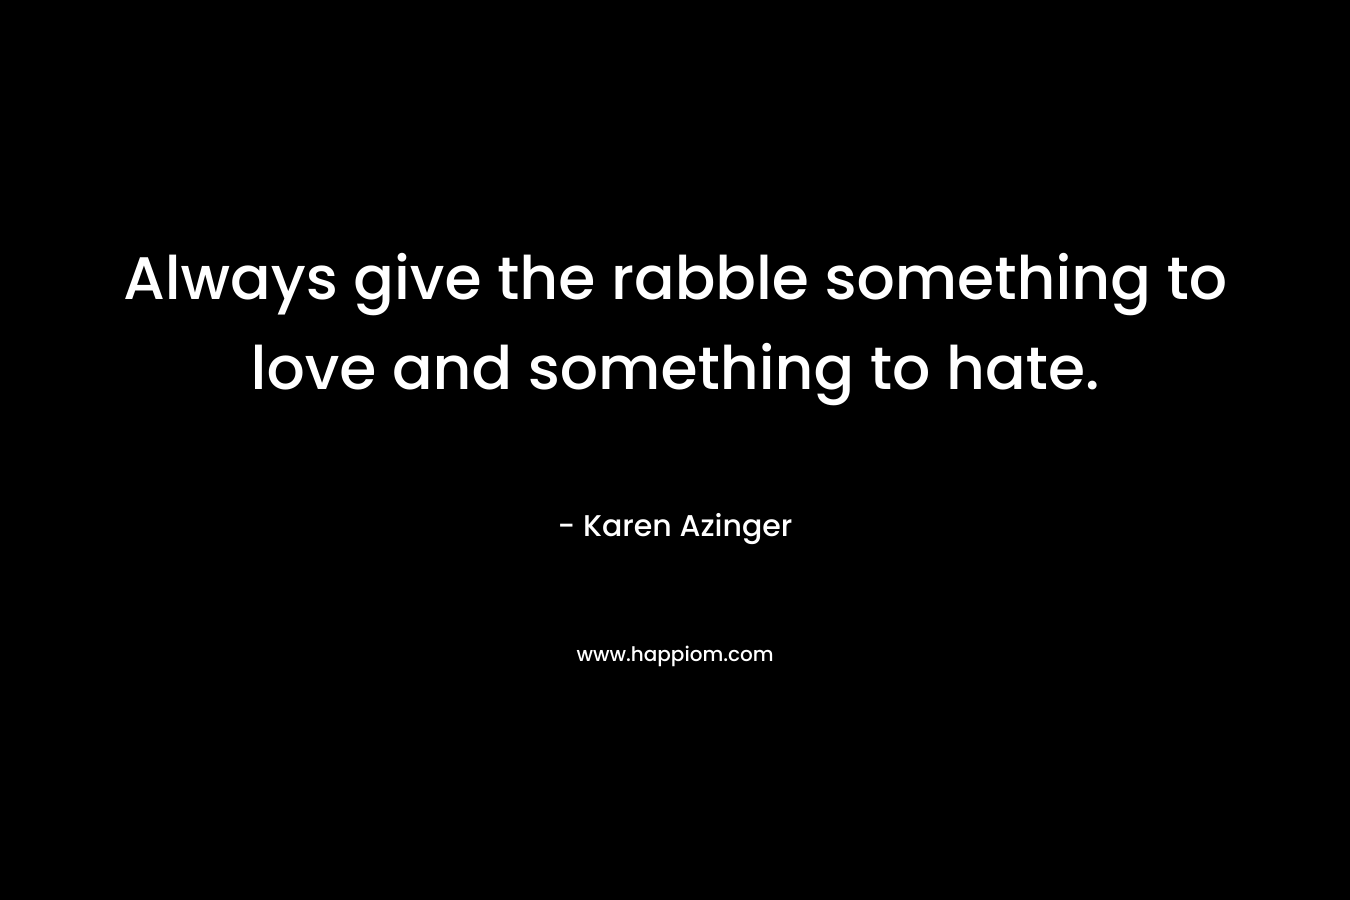 Always give the rabble something to love and something to hate.